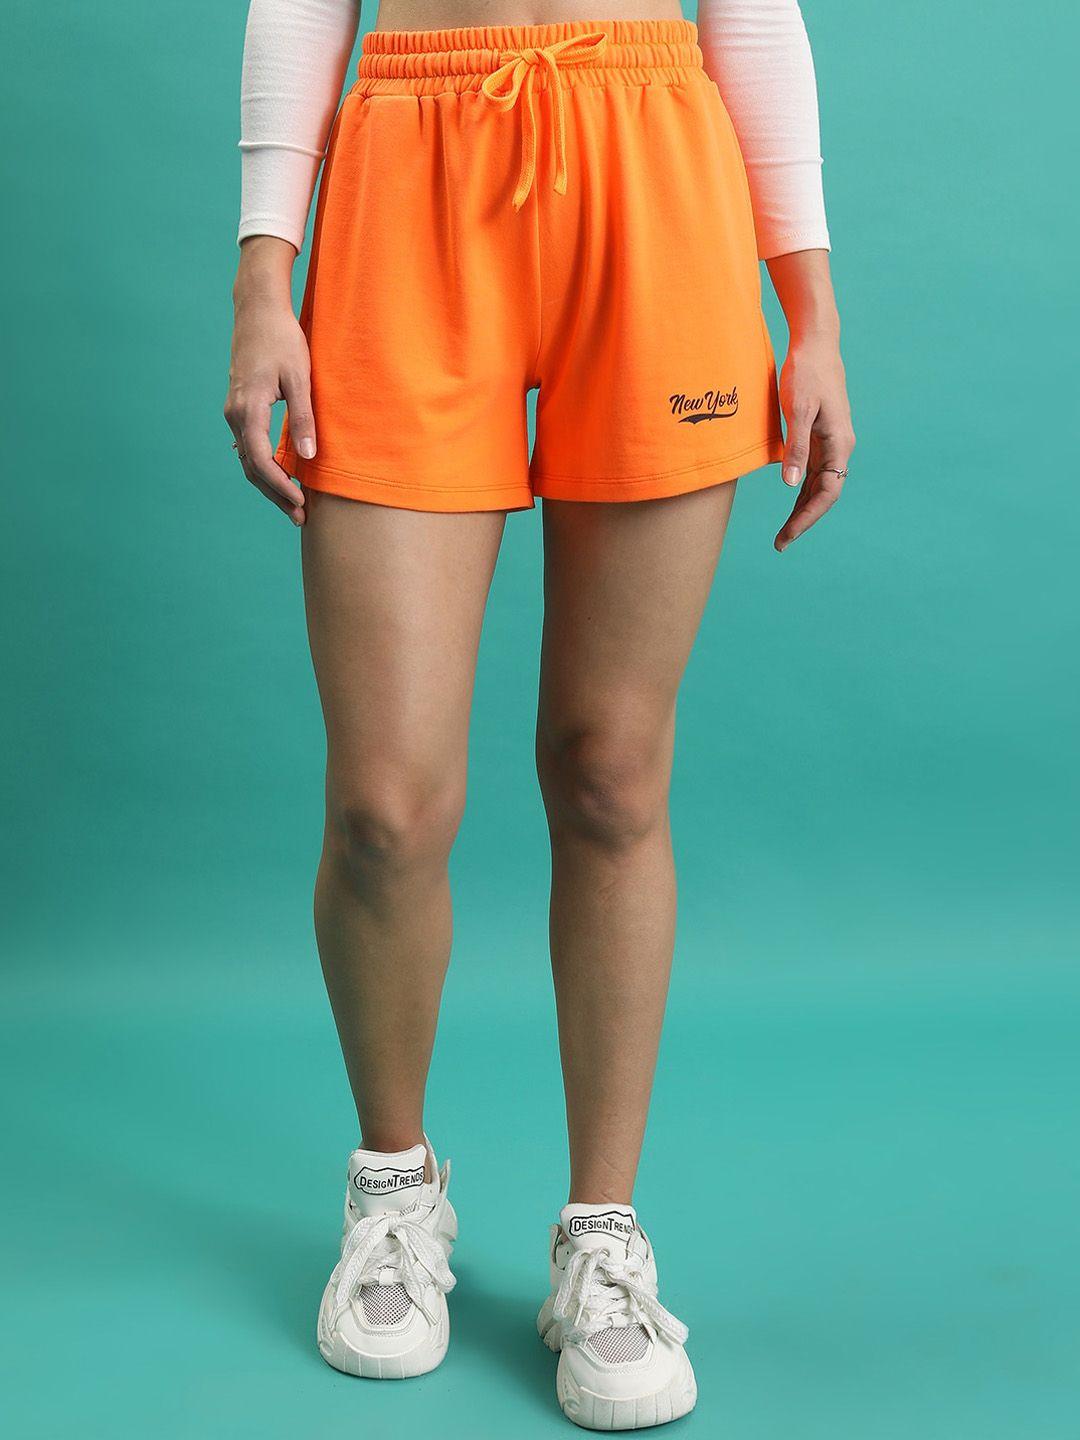 tokyo talkies women orange mid rise relaxed fit shorts